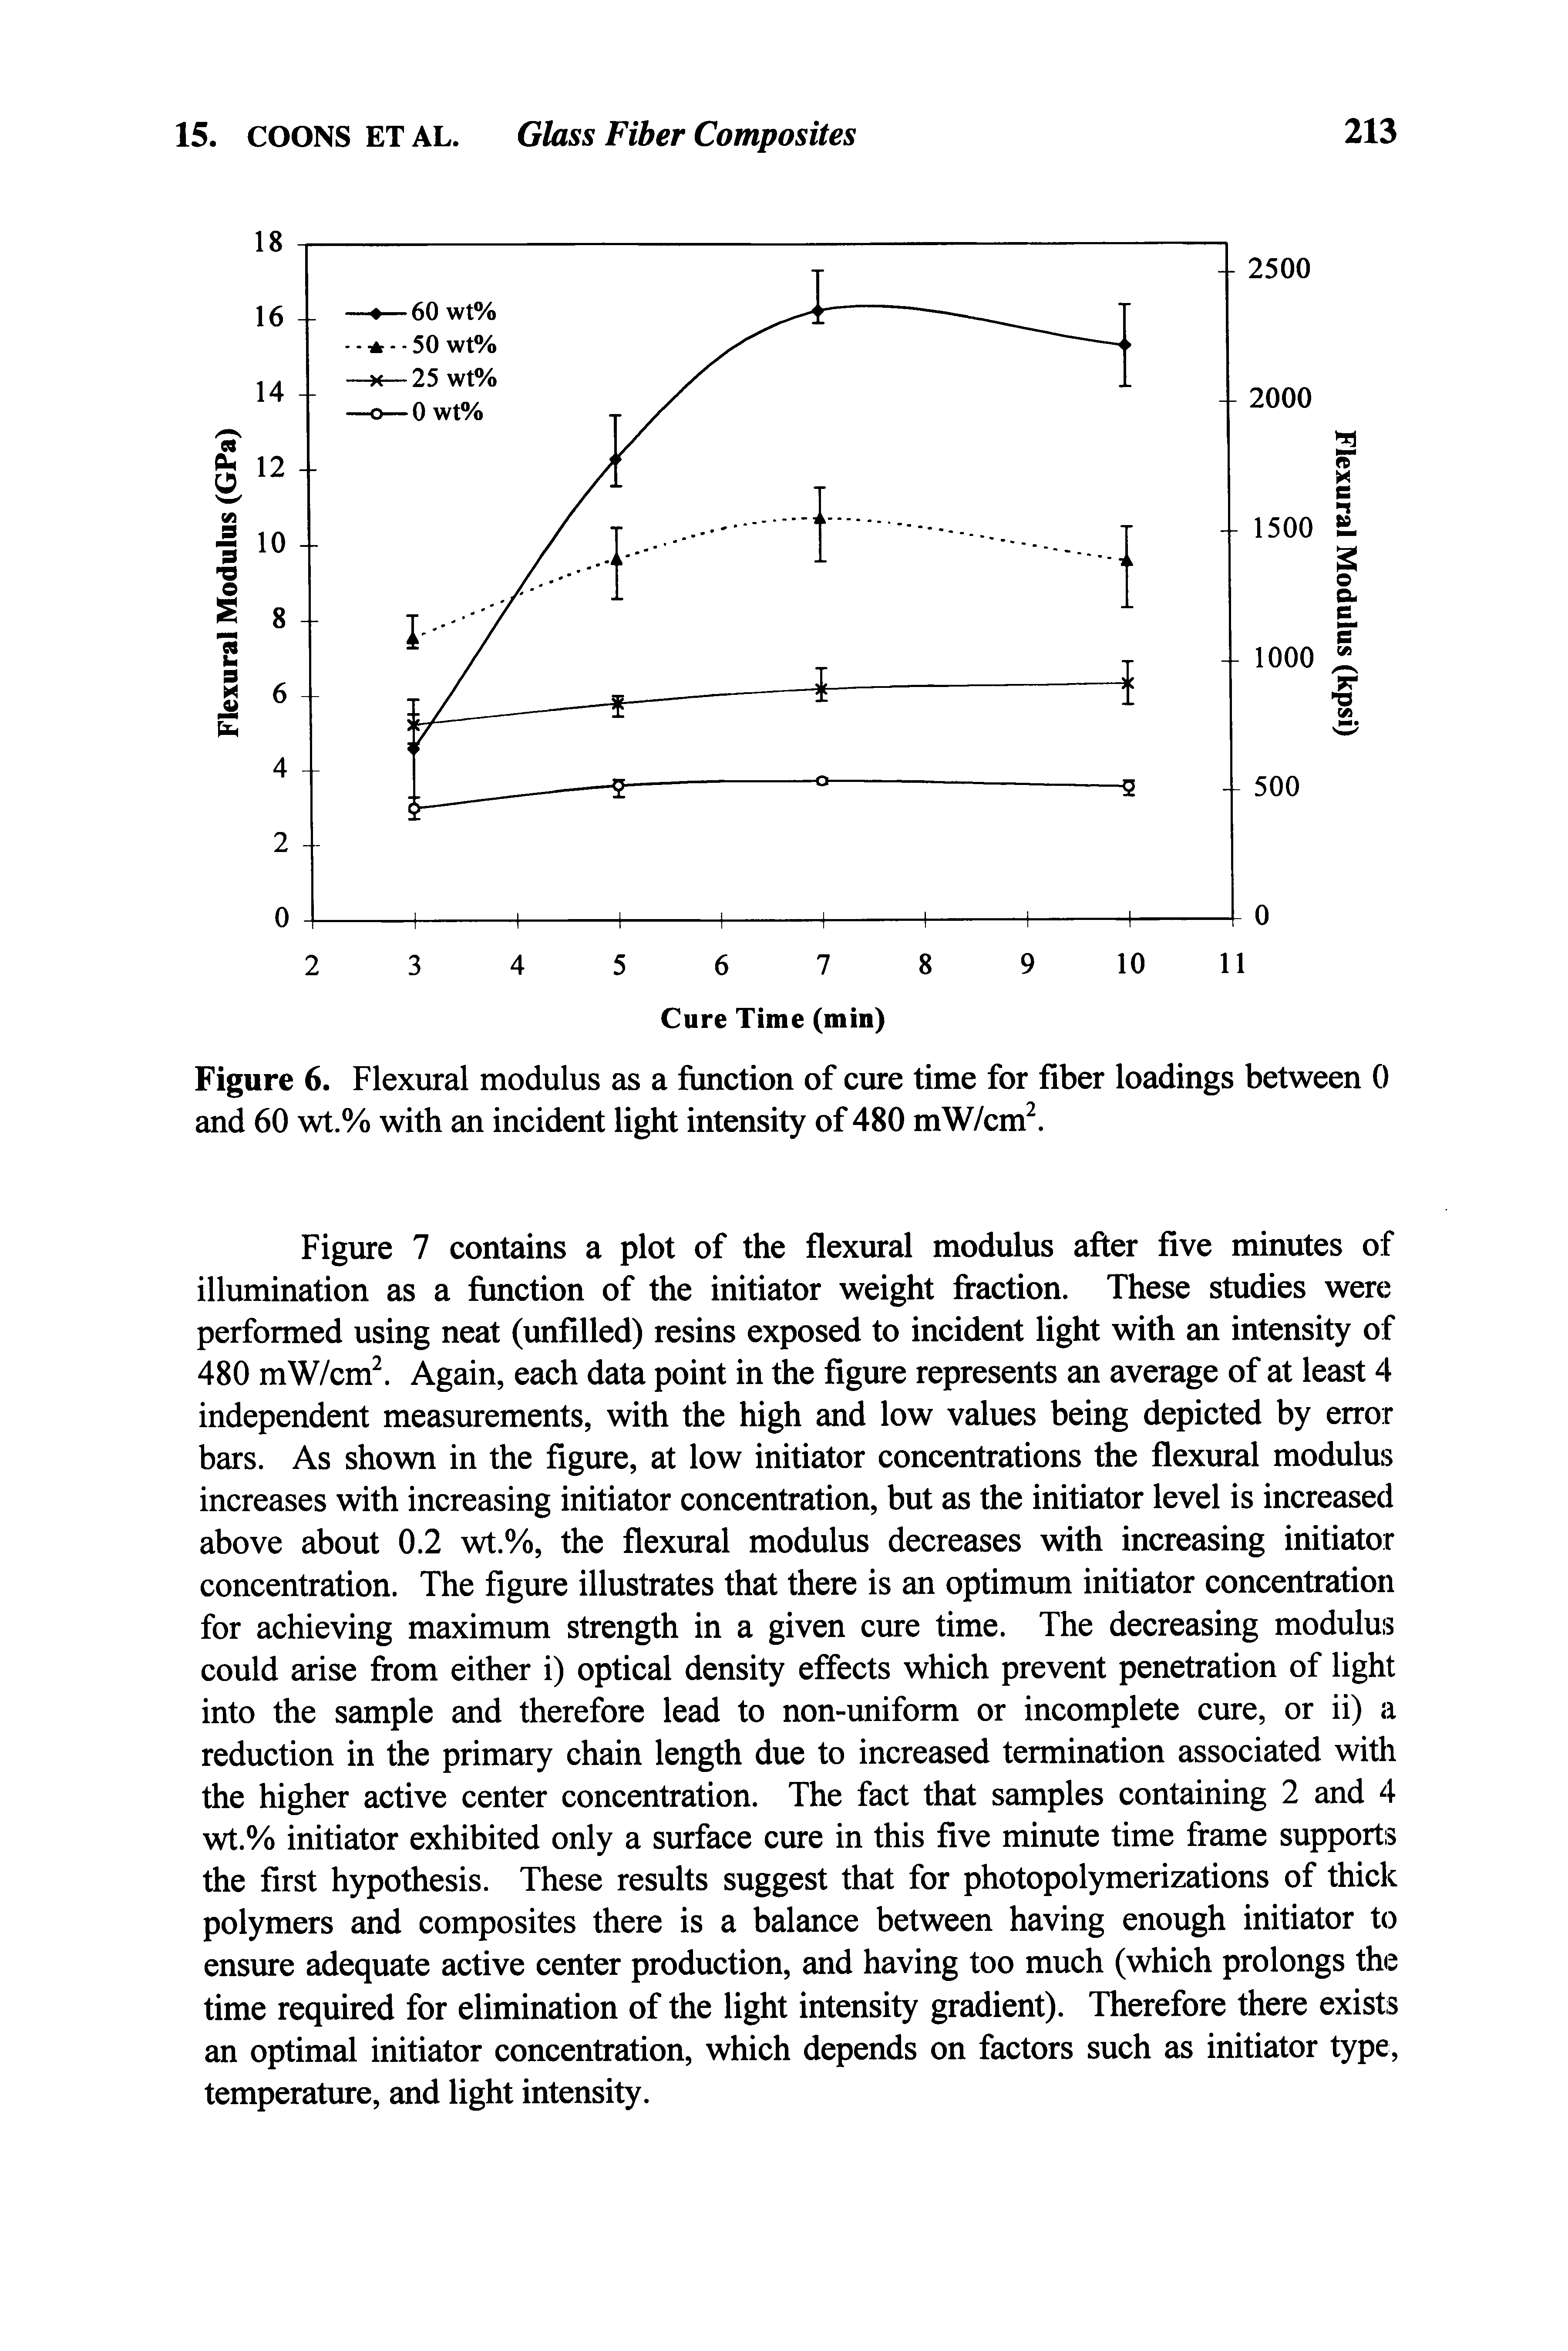 Figure 6. Flexural modulus as a function of cure time for fiber loadings between 0 and 60 wt.% with an incident light intensity of 480 mW/cm2.